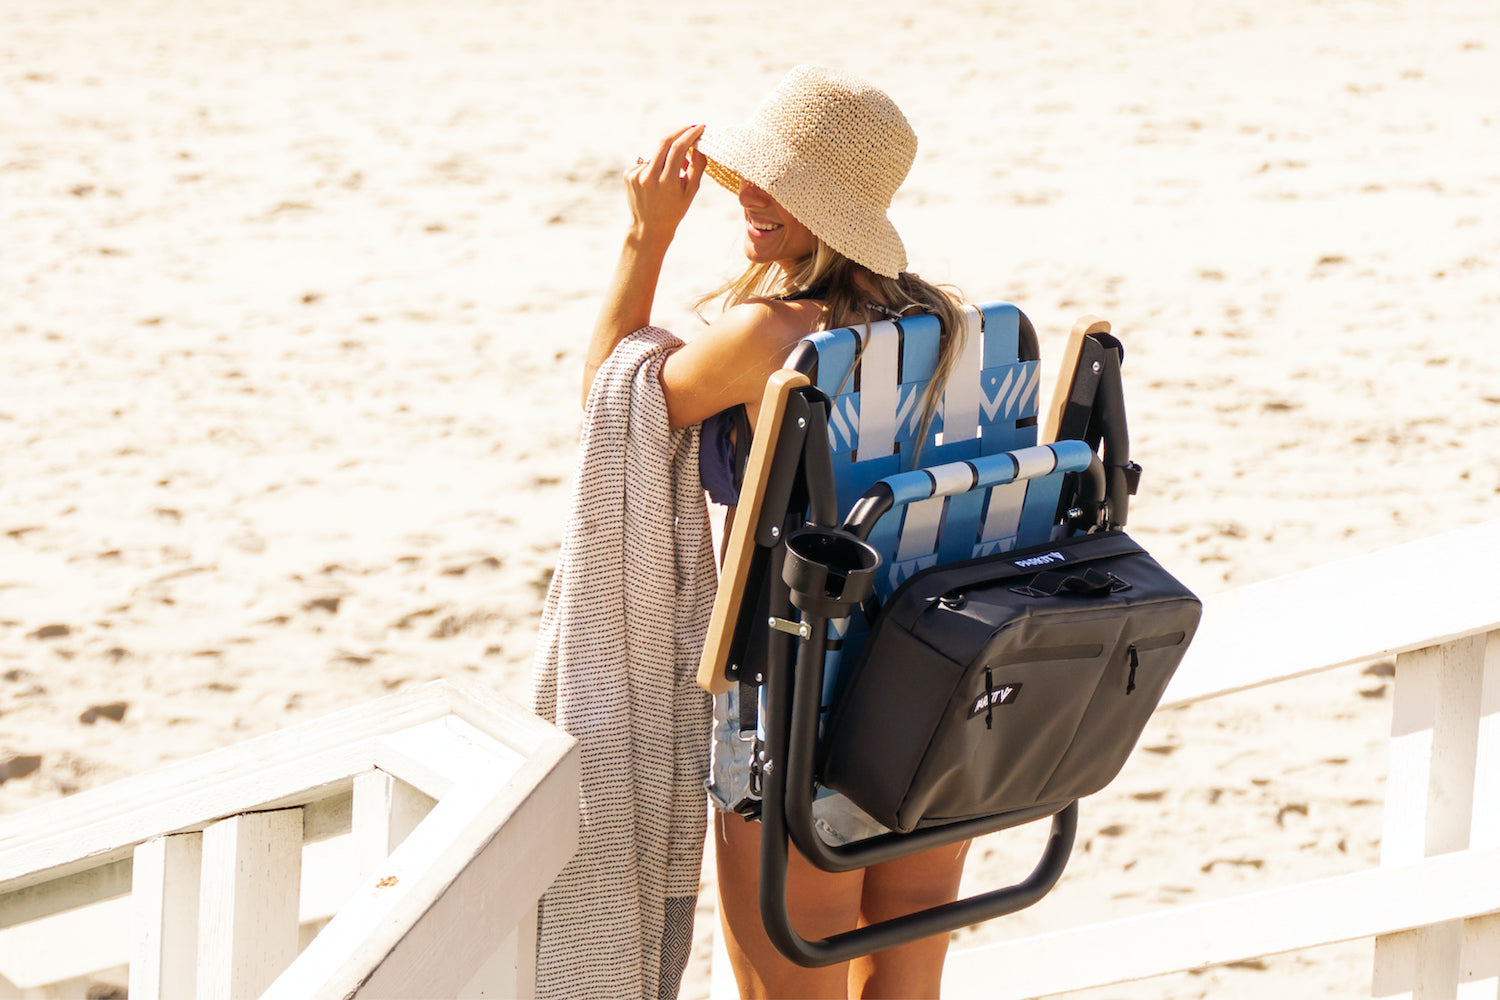 A woman carrying a voyager outdoor chair in glacier down to the beach while wearing a sun hat. She's carrying the voyager outdoor chair like a backpack with a full cooler from PARKIT.